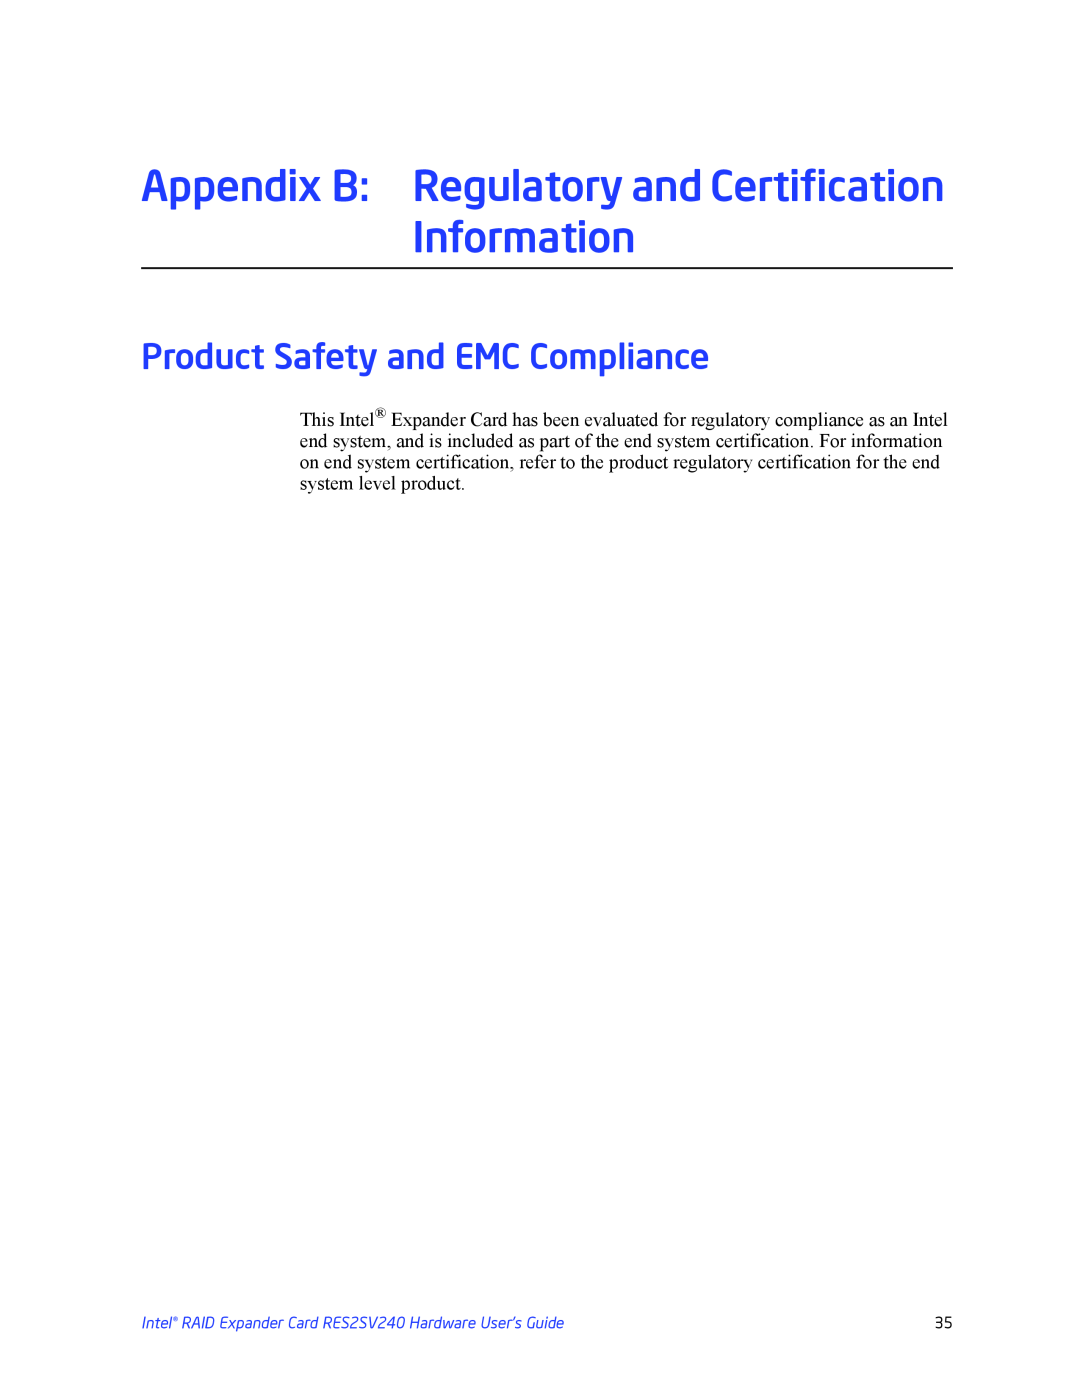 Intel RES2SV240 manual Appendix B Regulatory and Certification, Information, Product Safety and EMC Compliance 